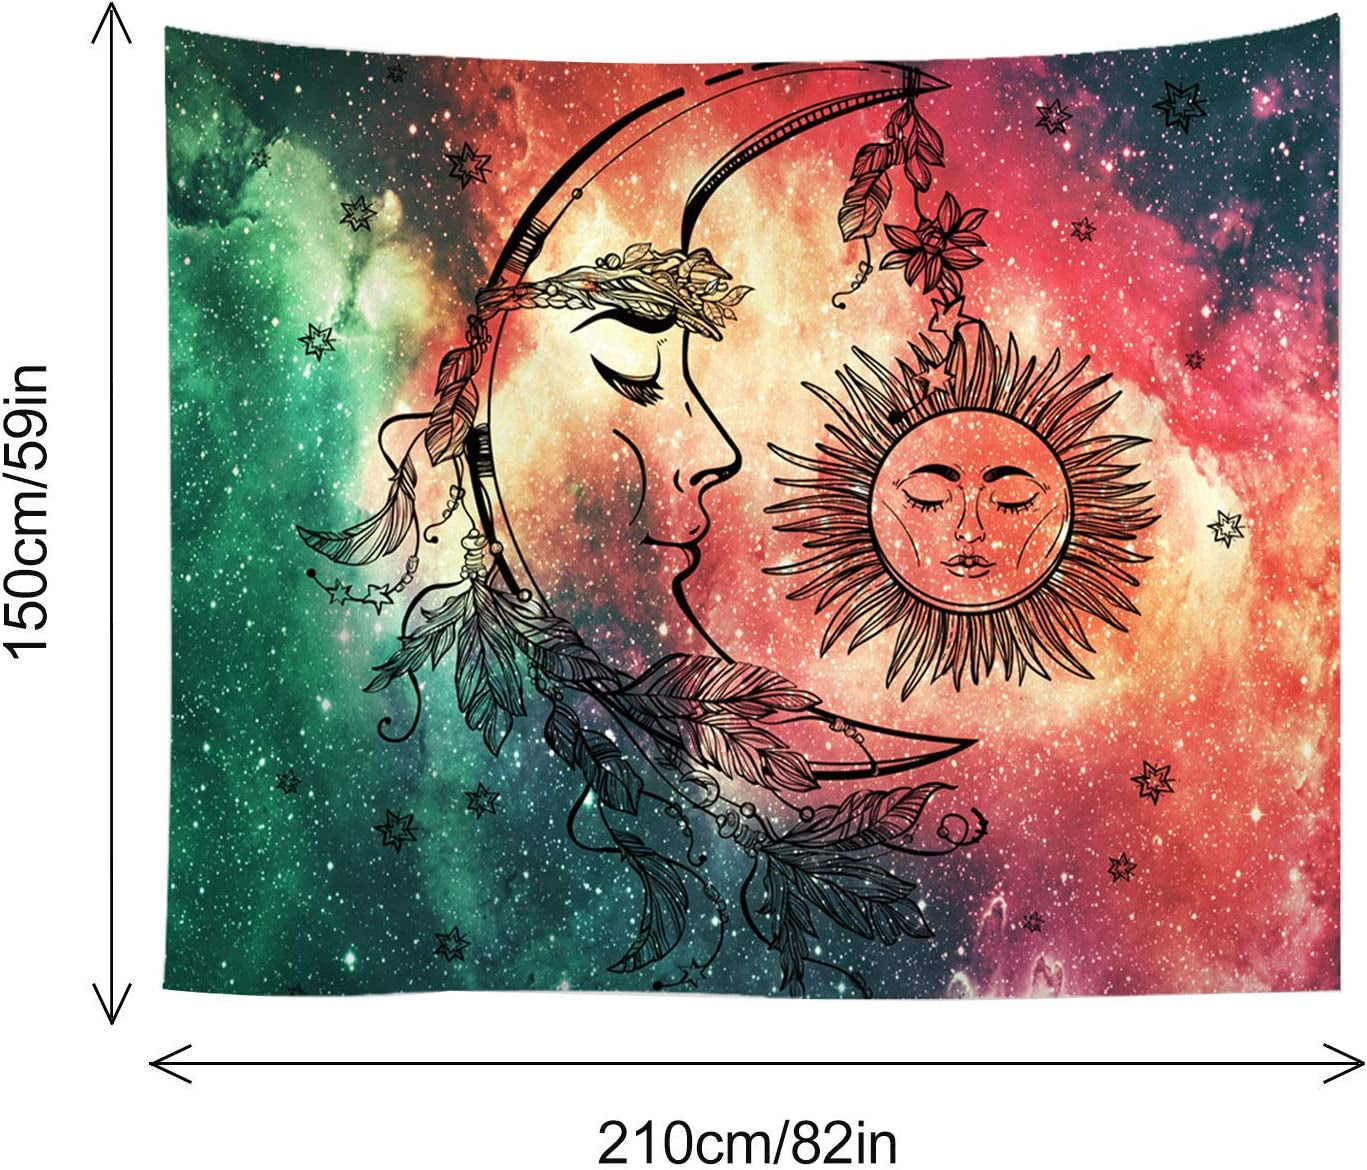 Psychedelic Tapestry Wall Hanging, Boho Mandala Tapestry, Celestial Starry Sky Wall Tapestry, Wall Art Decoration for Bedroom Living Room Dorm, Window Curtain Picnic Mat